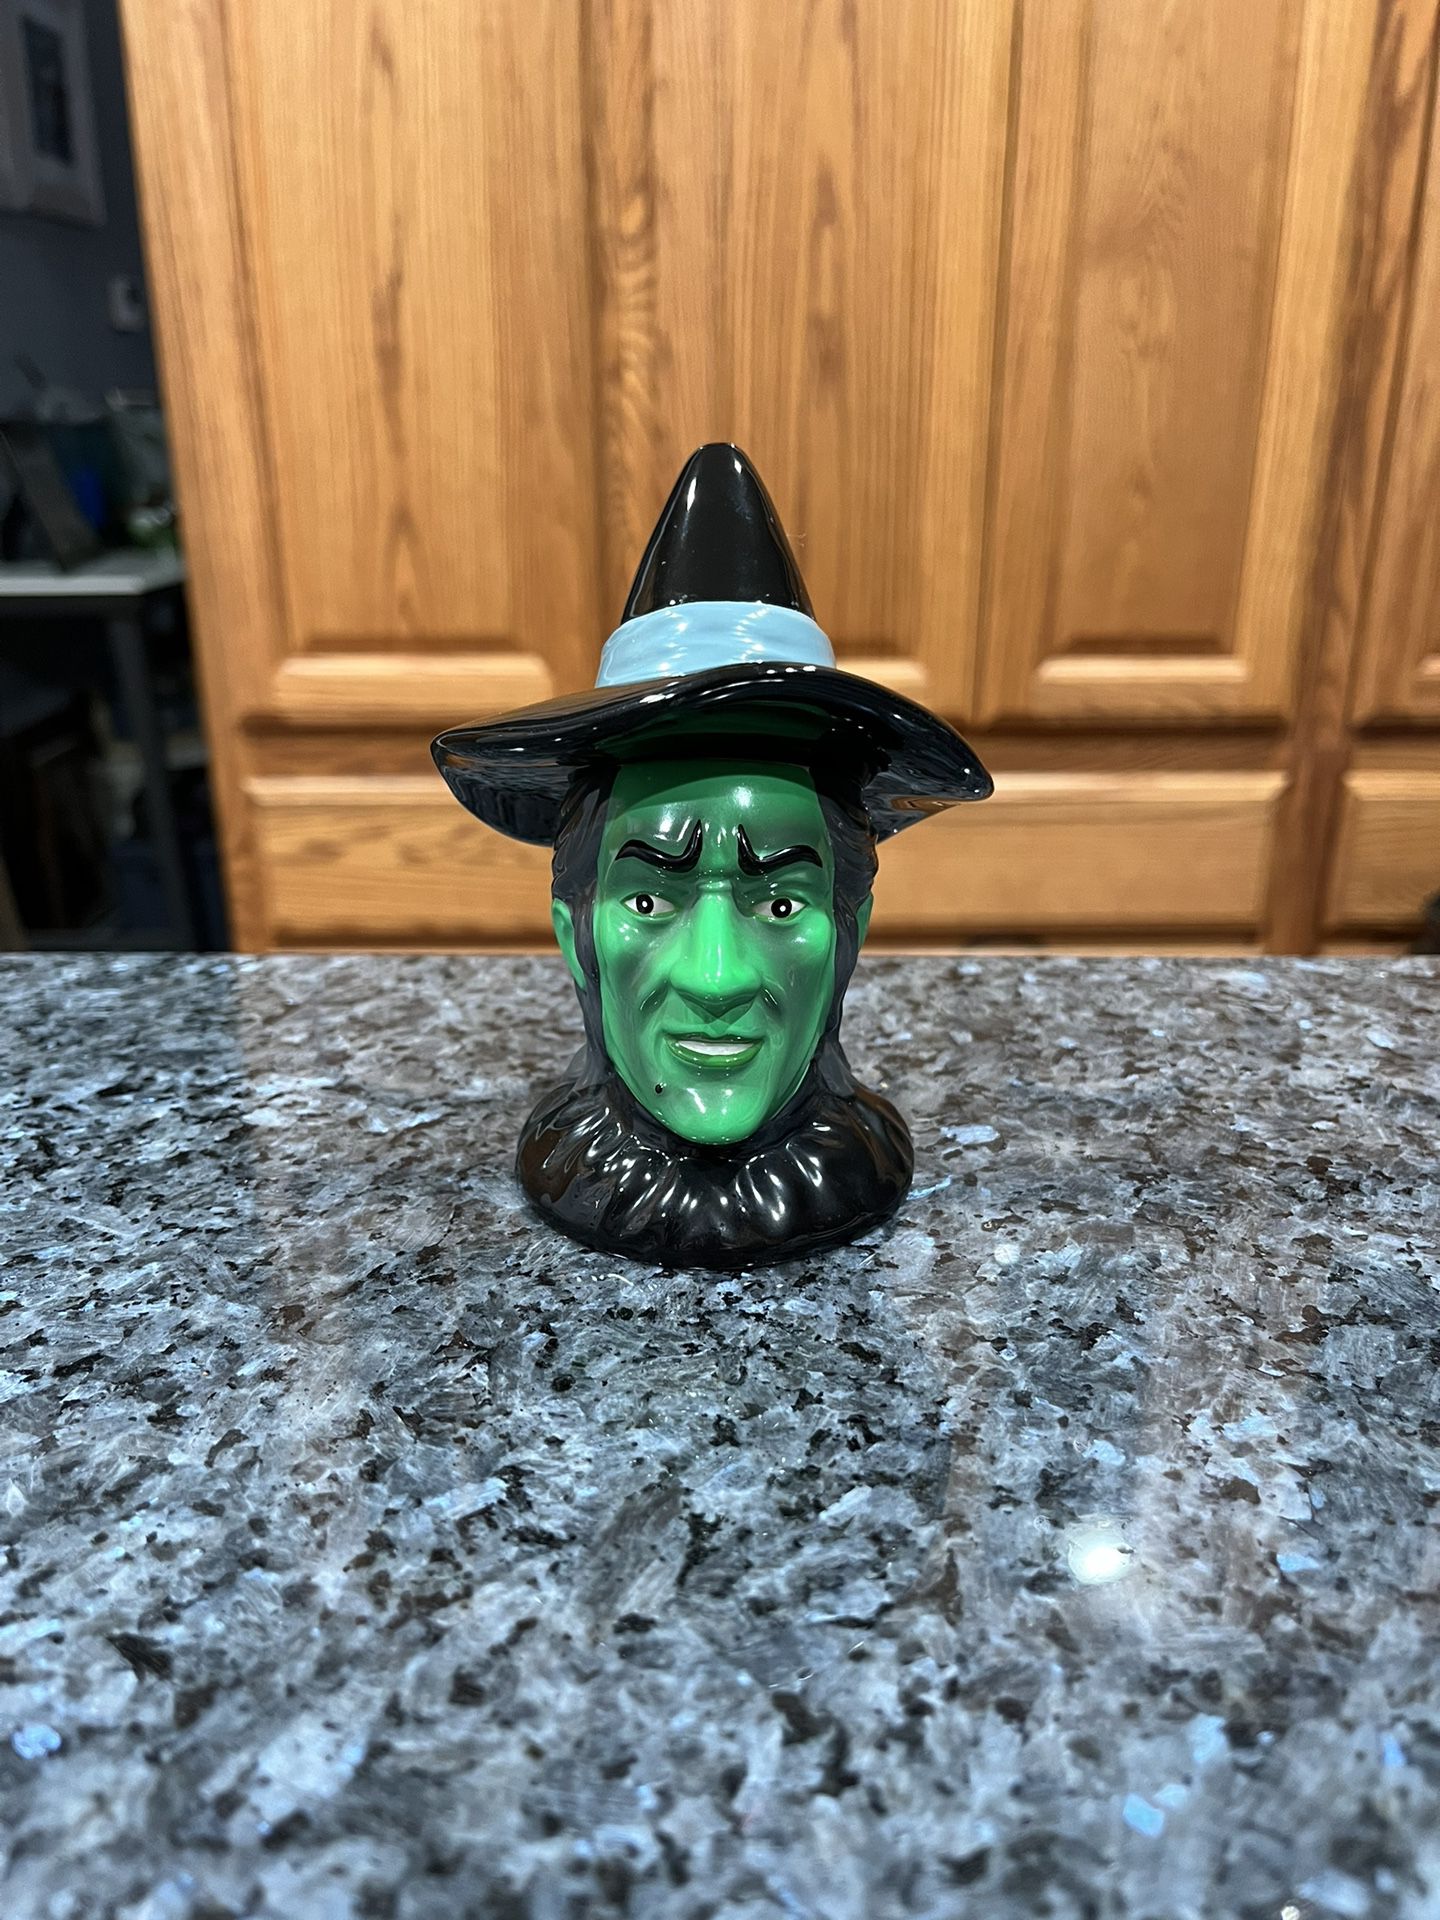 Vintage Rare 1999 Enesco Wizard of Oz Wicked Witch Pair Of Salt And Pepper Shakers.  Brand New Never Used 